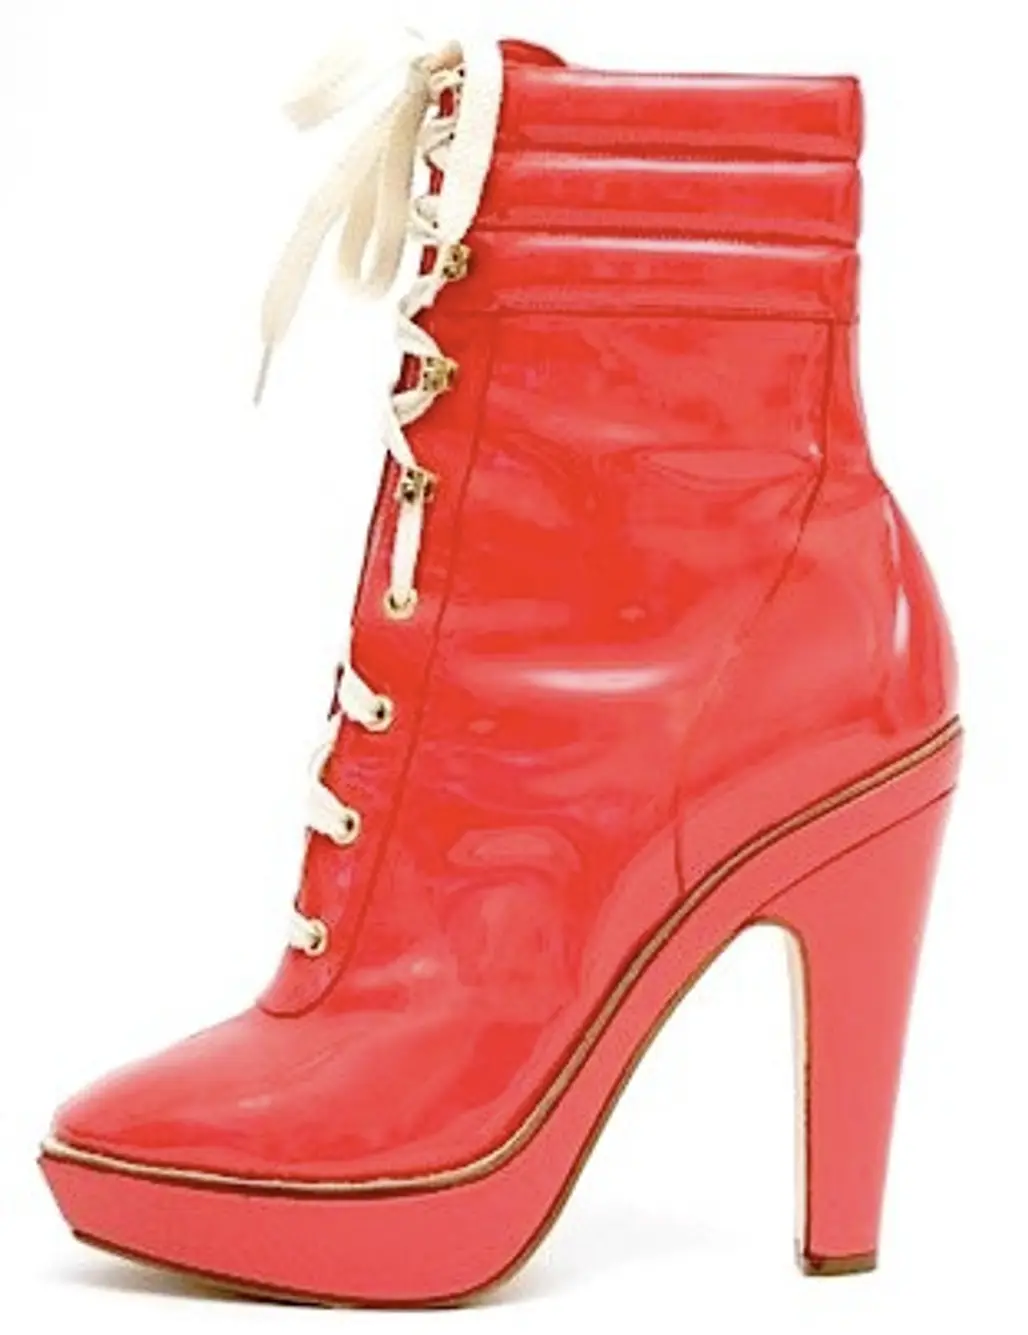 Patent Leather Lace-up Boots by Emilio Pucci